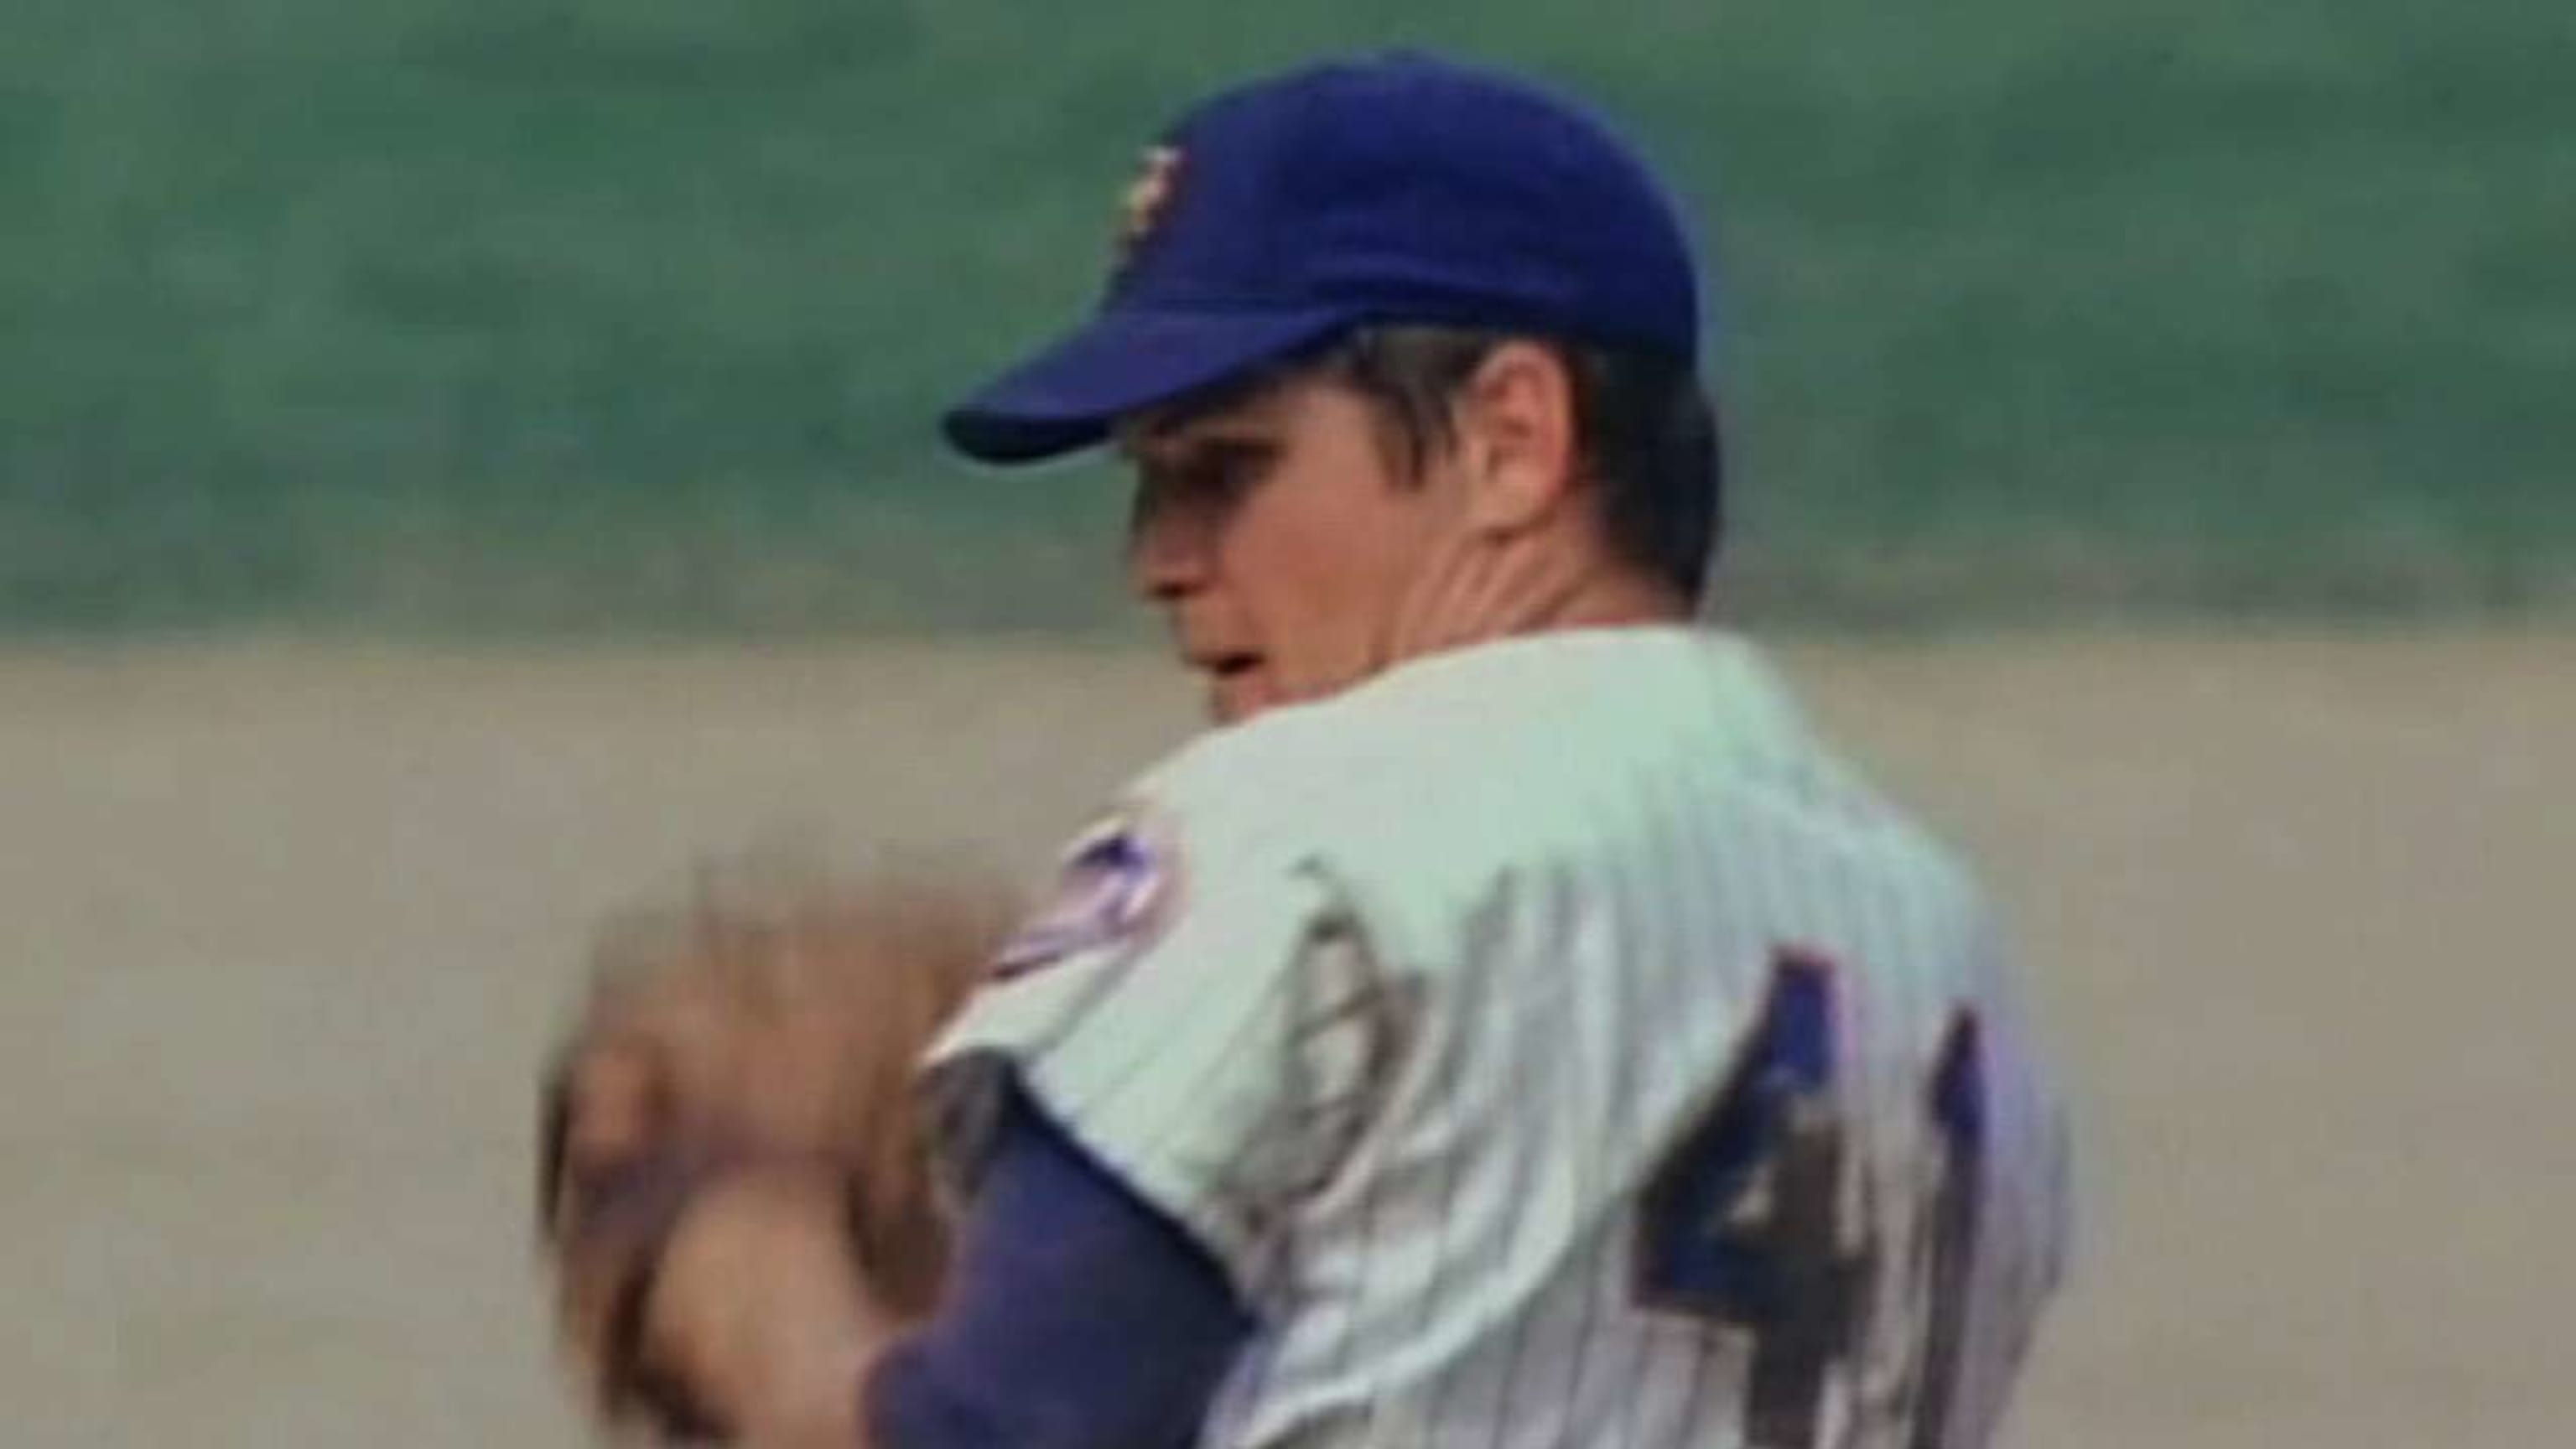 Tom Seaver's Remarkable Strikeouts - Mets History